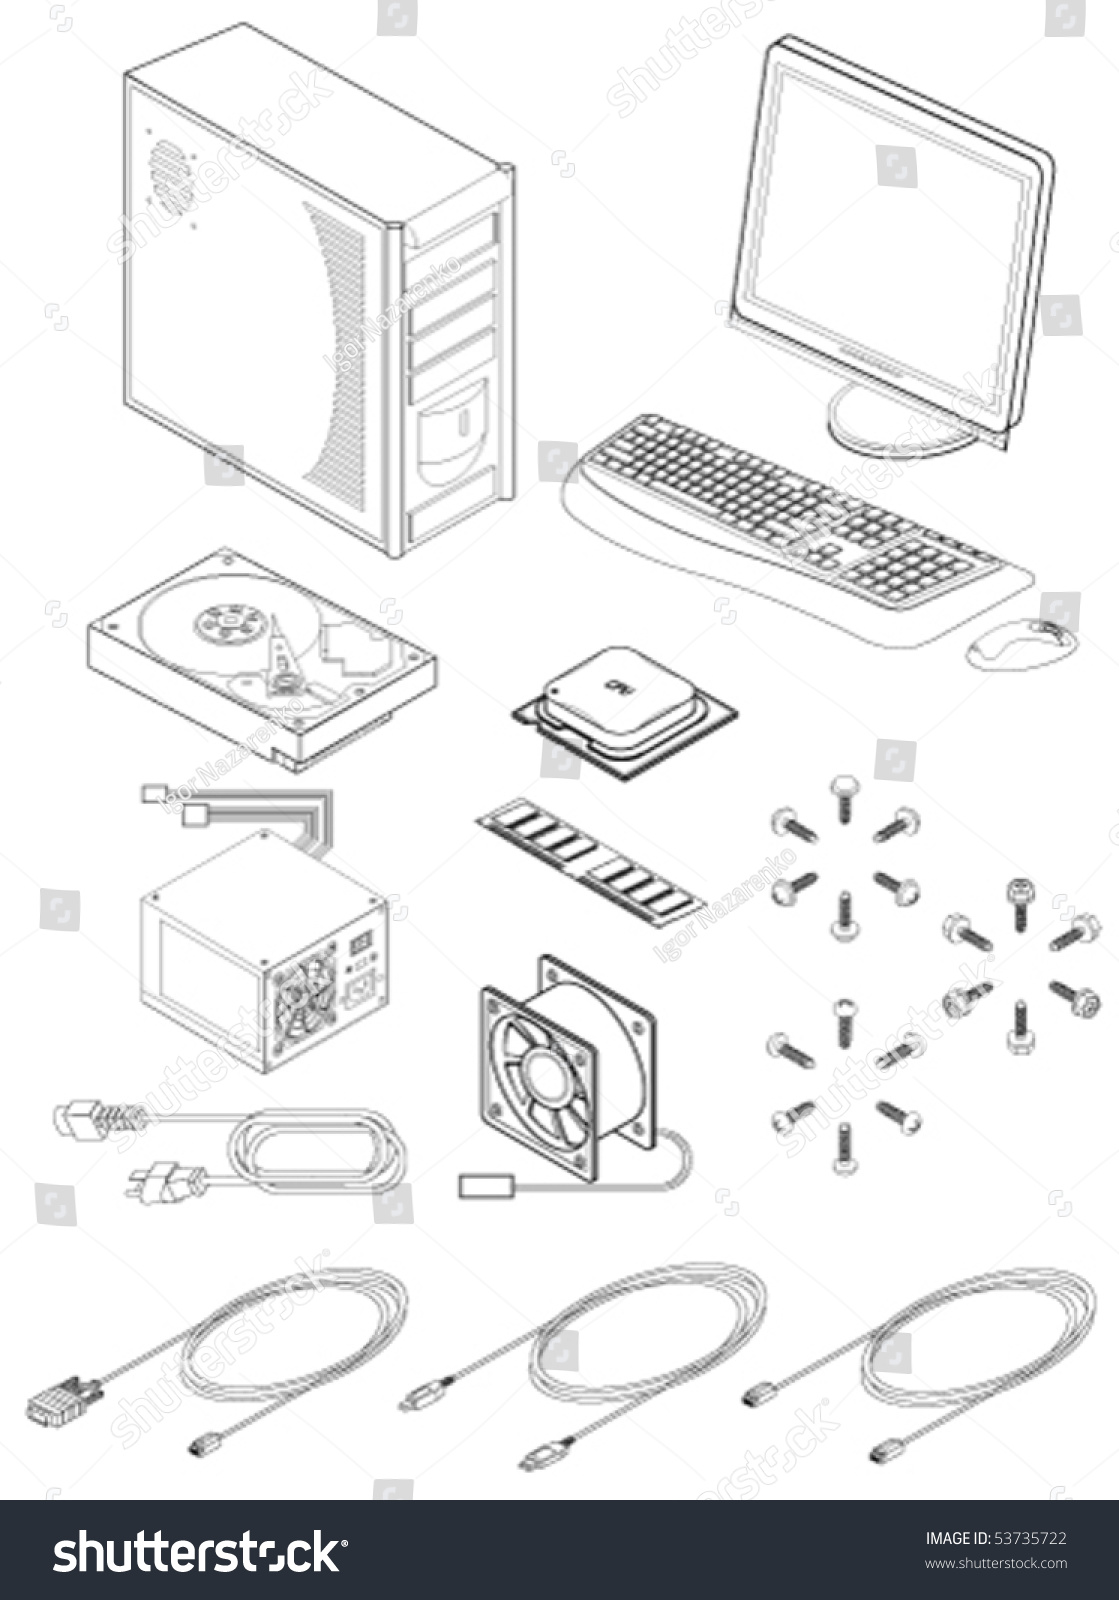 Vector Illustration Various Computer Parts Accessories Stock